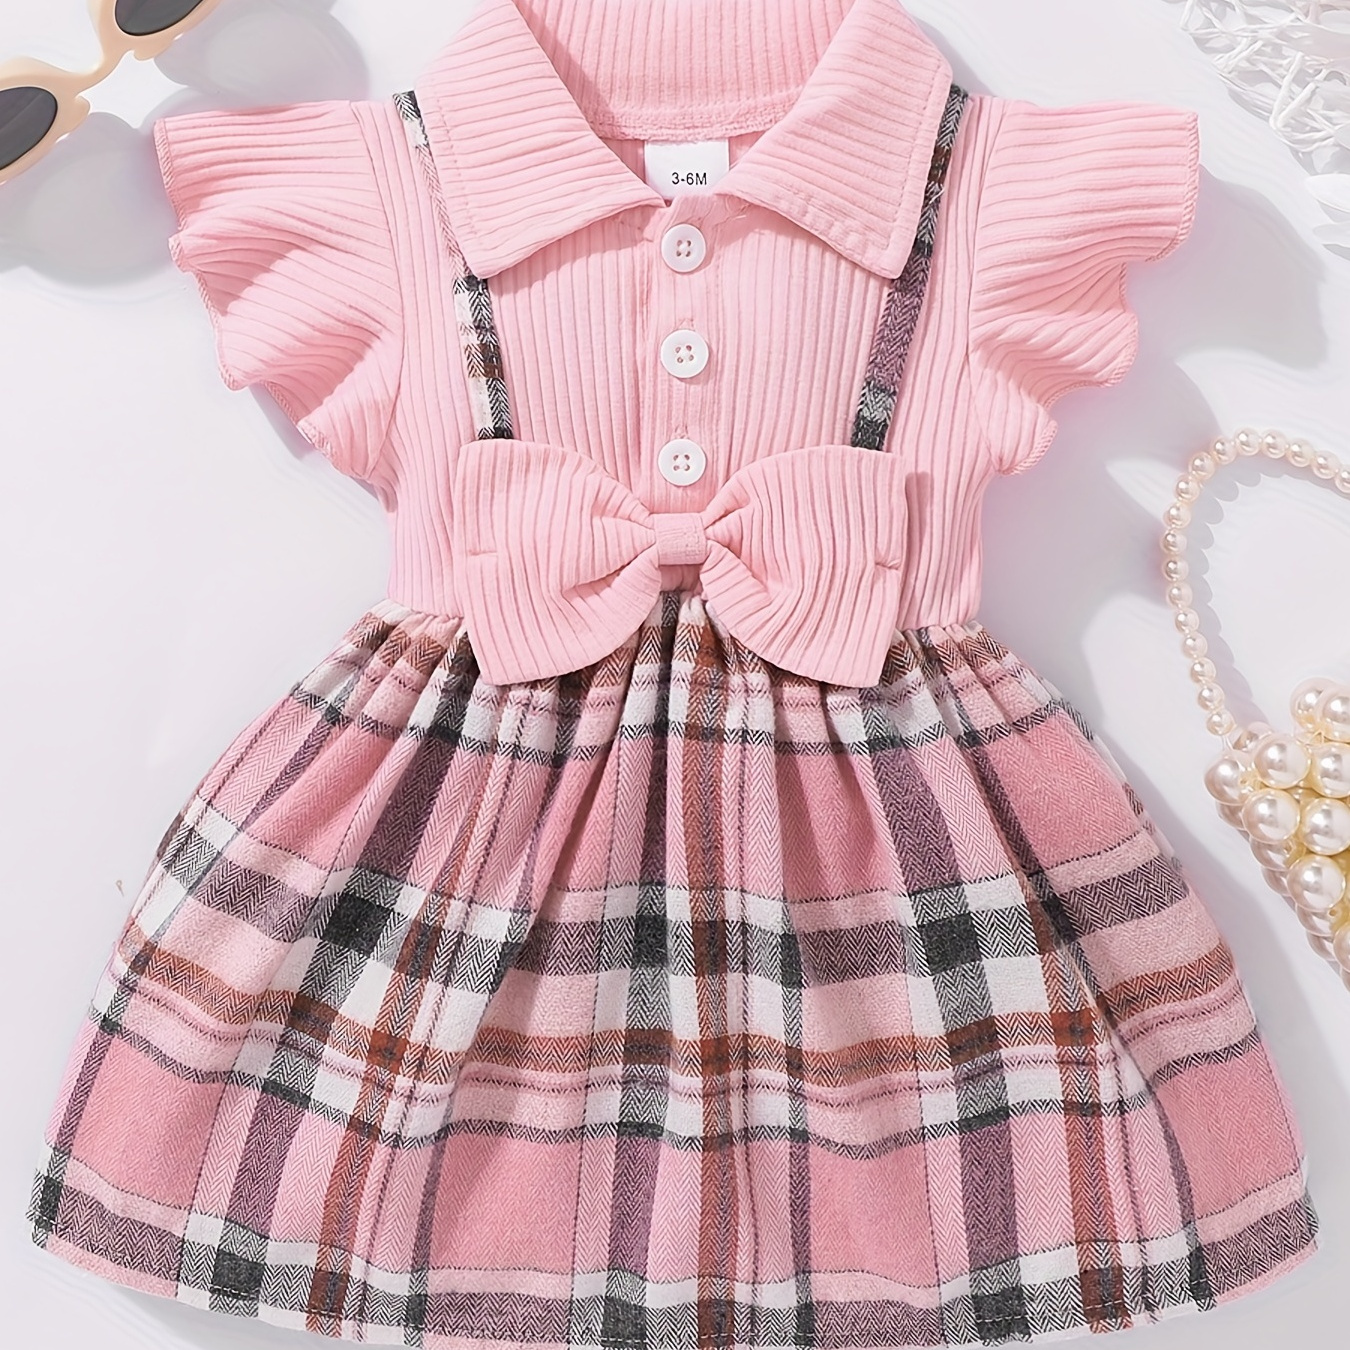 

Girl's Casual Plaid Bowknot Flutter Sleeve Lapel Collar Dress, Trendy Stitching Dress, Toddlers Children Cotton Summer Clothes